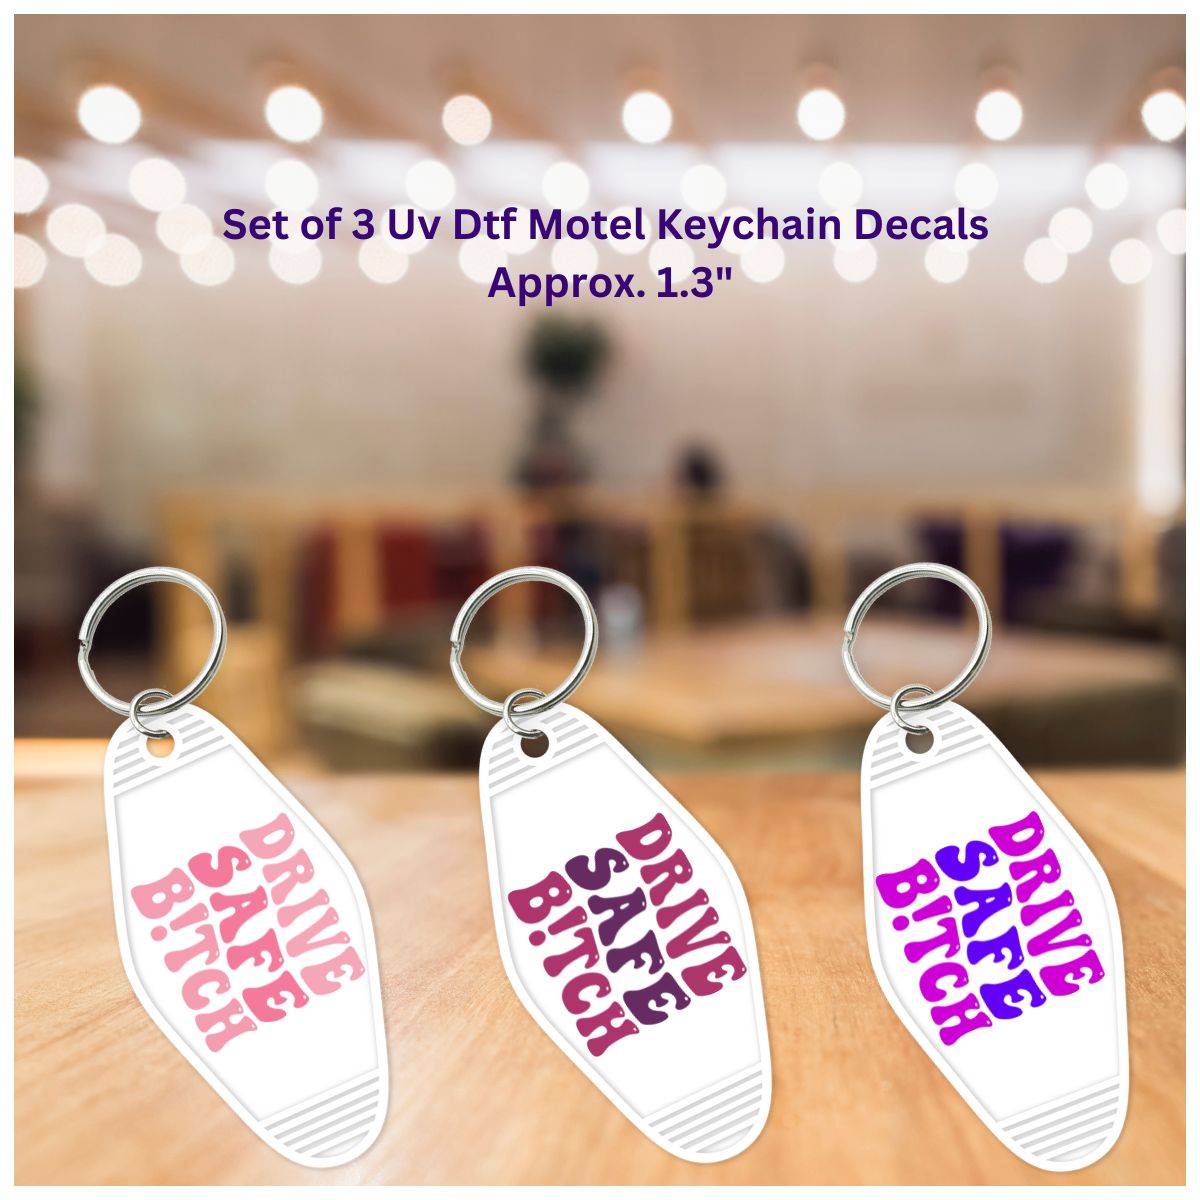 Set of 3 Uv Dtf Shot Glass or Motel Key Chain Decals Drive Safe Bitch